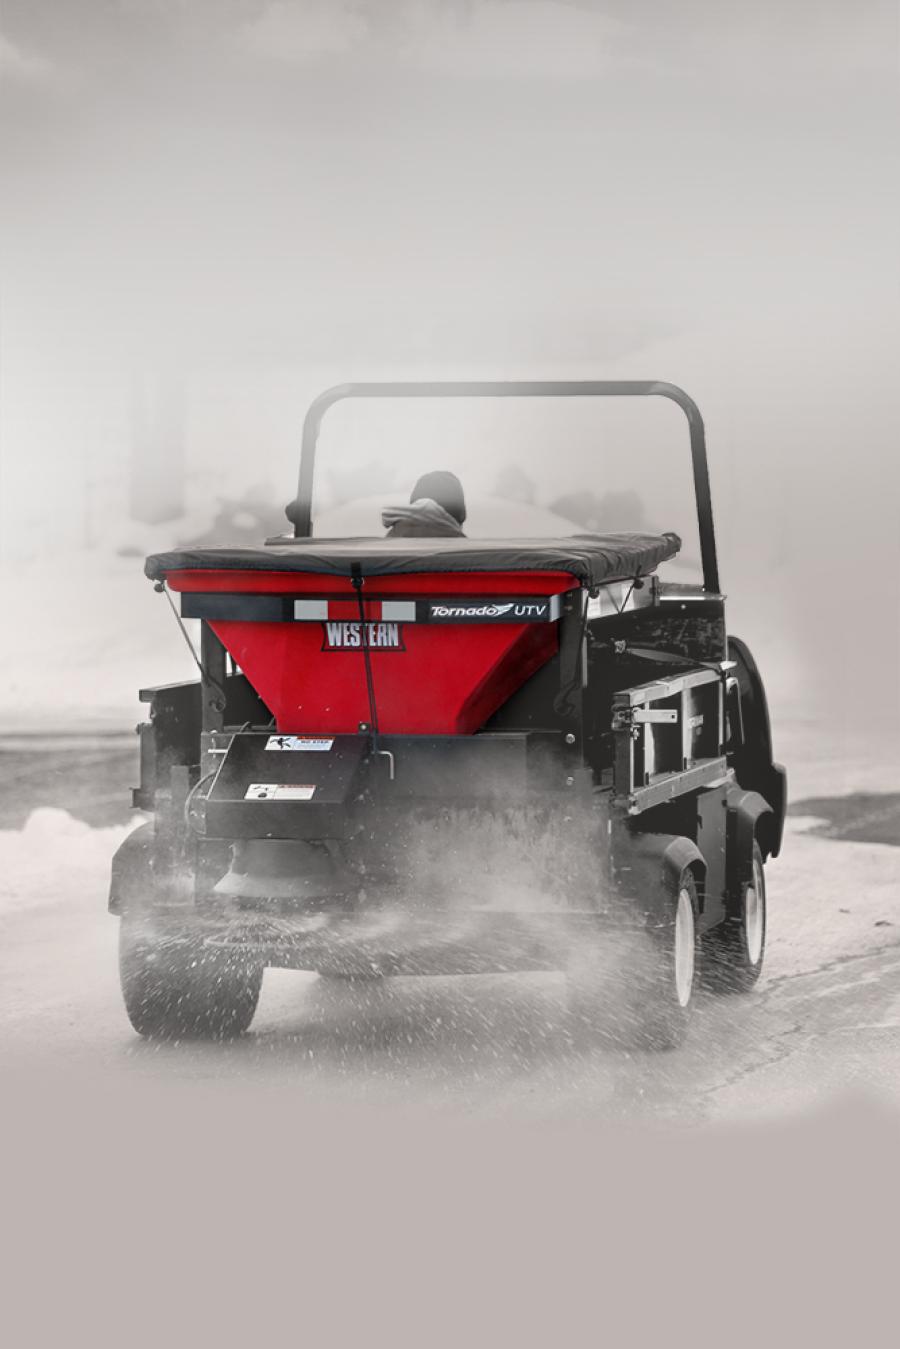 The Tornado UTV spreader is built with a standard inverted vibrating V for maximum material agitation, a standard top screen to help break up large chunks of de-icing material while loading, a heavy duty steel frame with electrostatic powder-coated finish, and a fitted tarp cover that helps ice control material stay dry to prevent clumping.